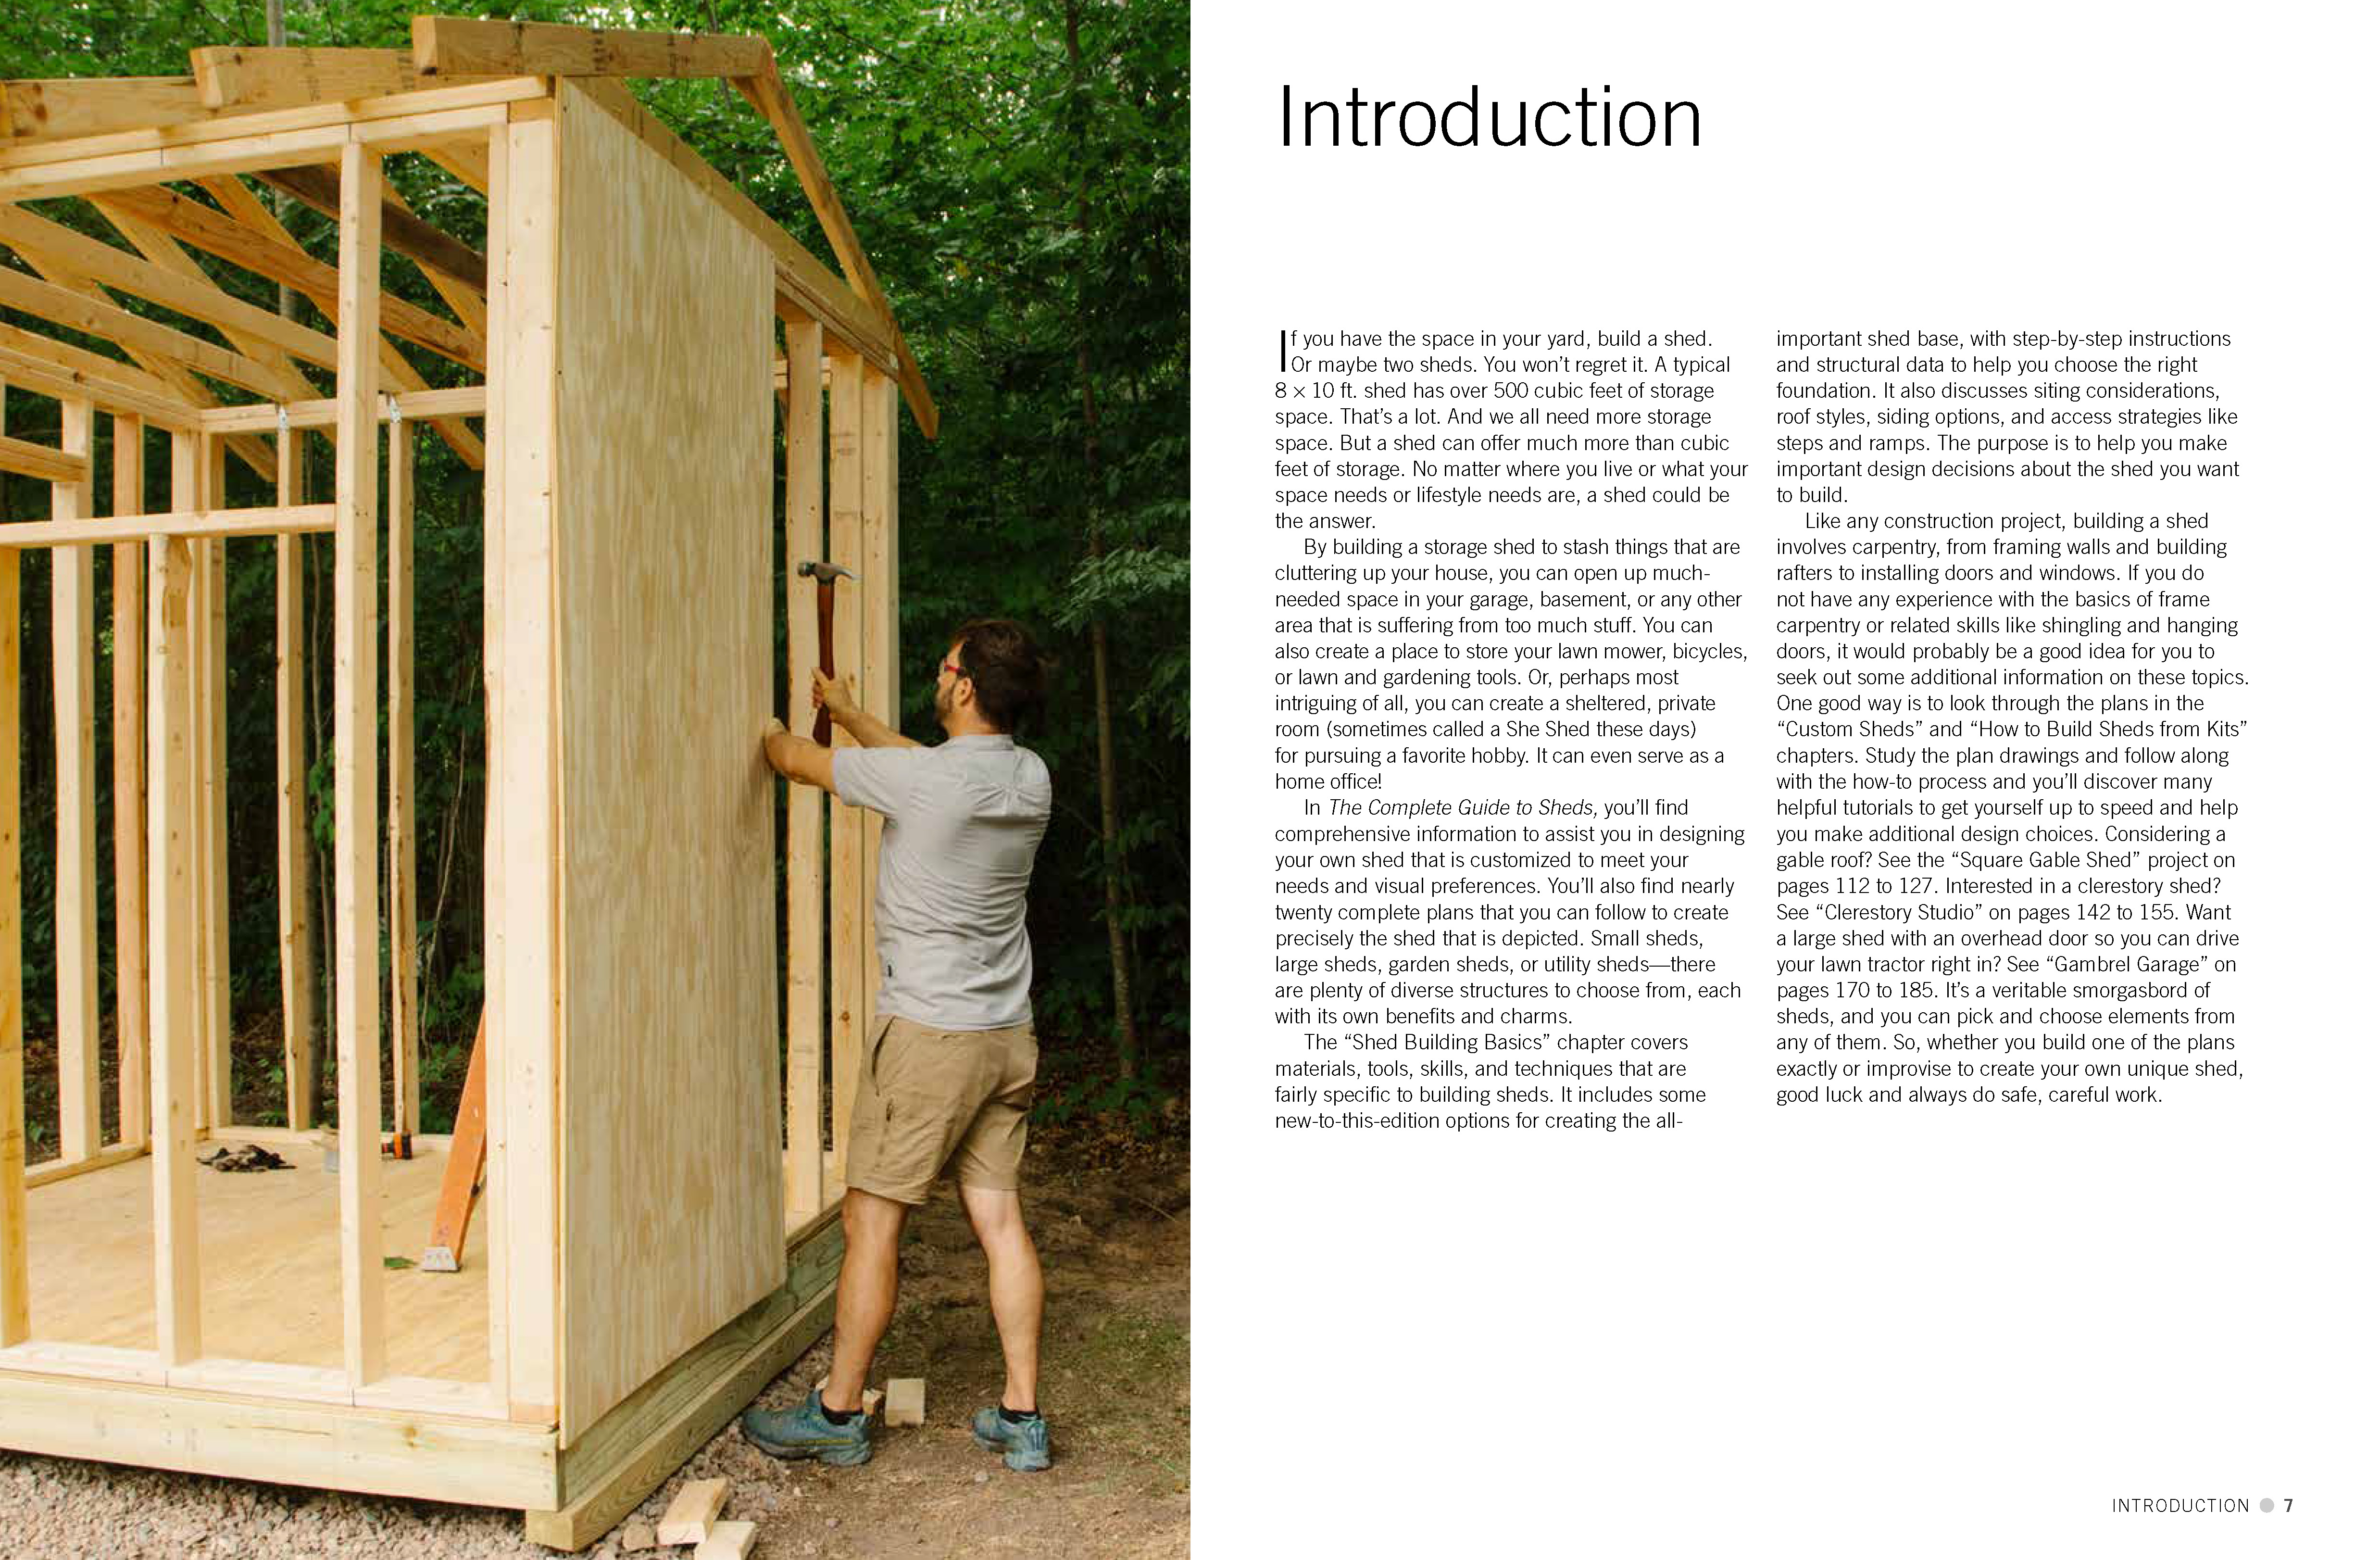 The Complete Guide to Sheds Updated 4th Edition